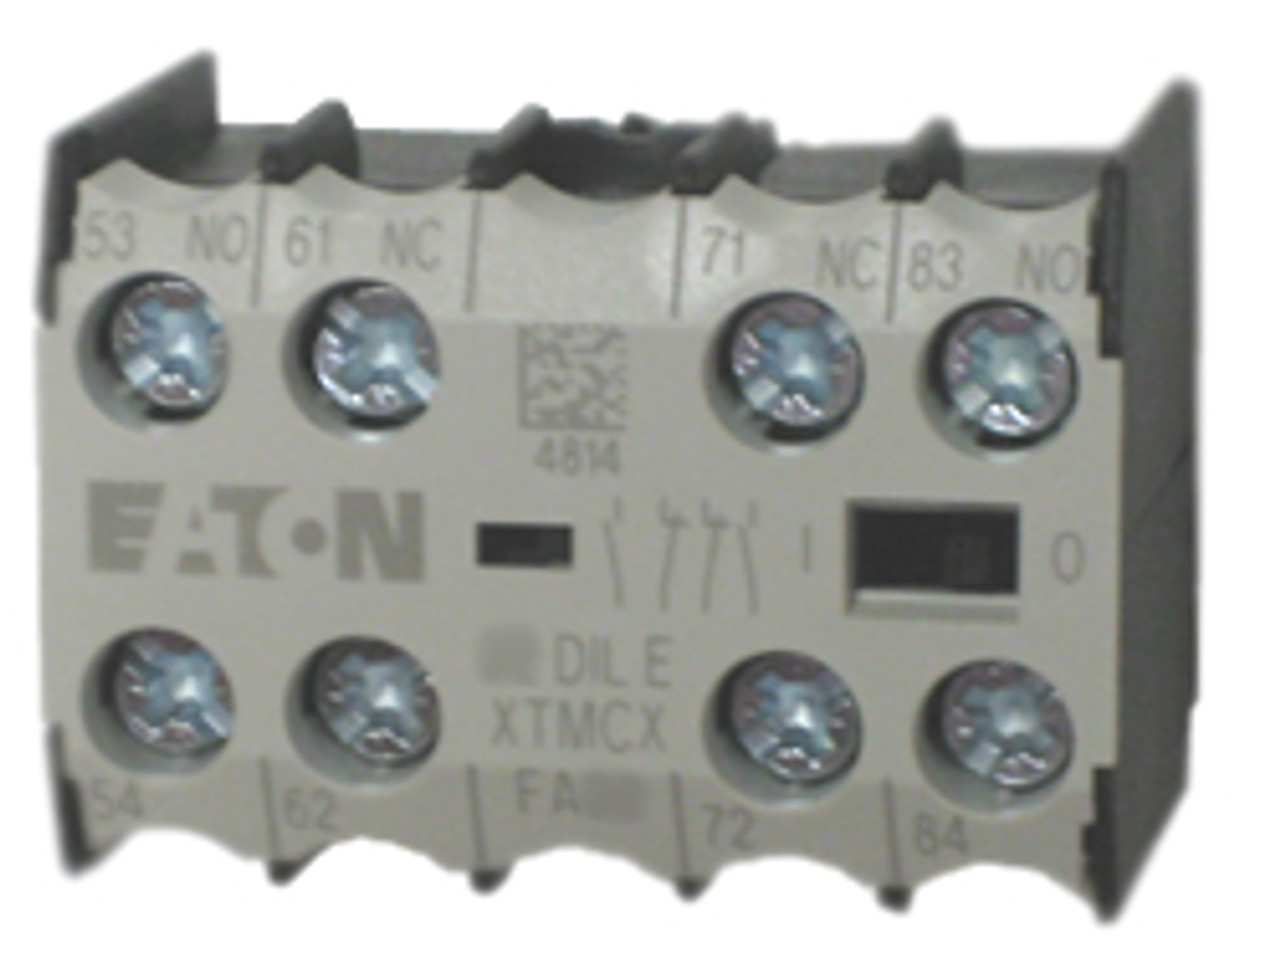 Eaton/Moeller 31DILE auxiliary contact